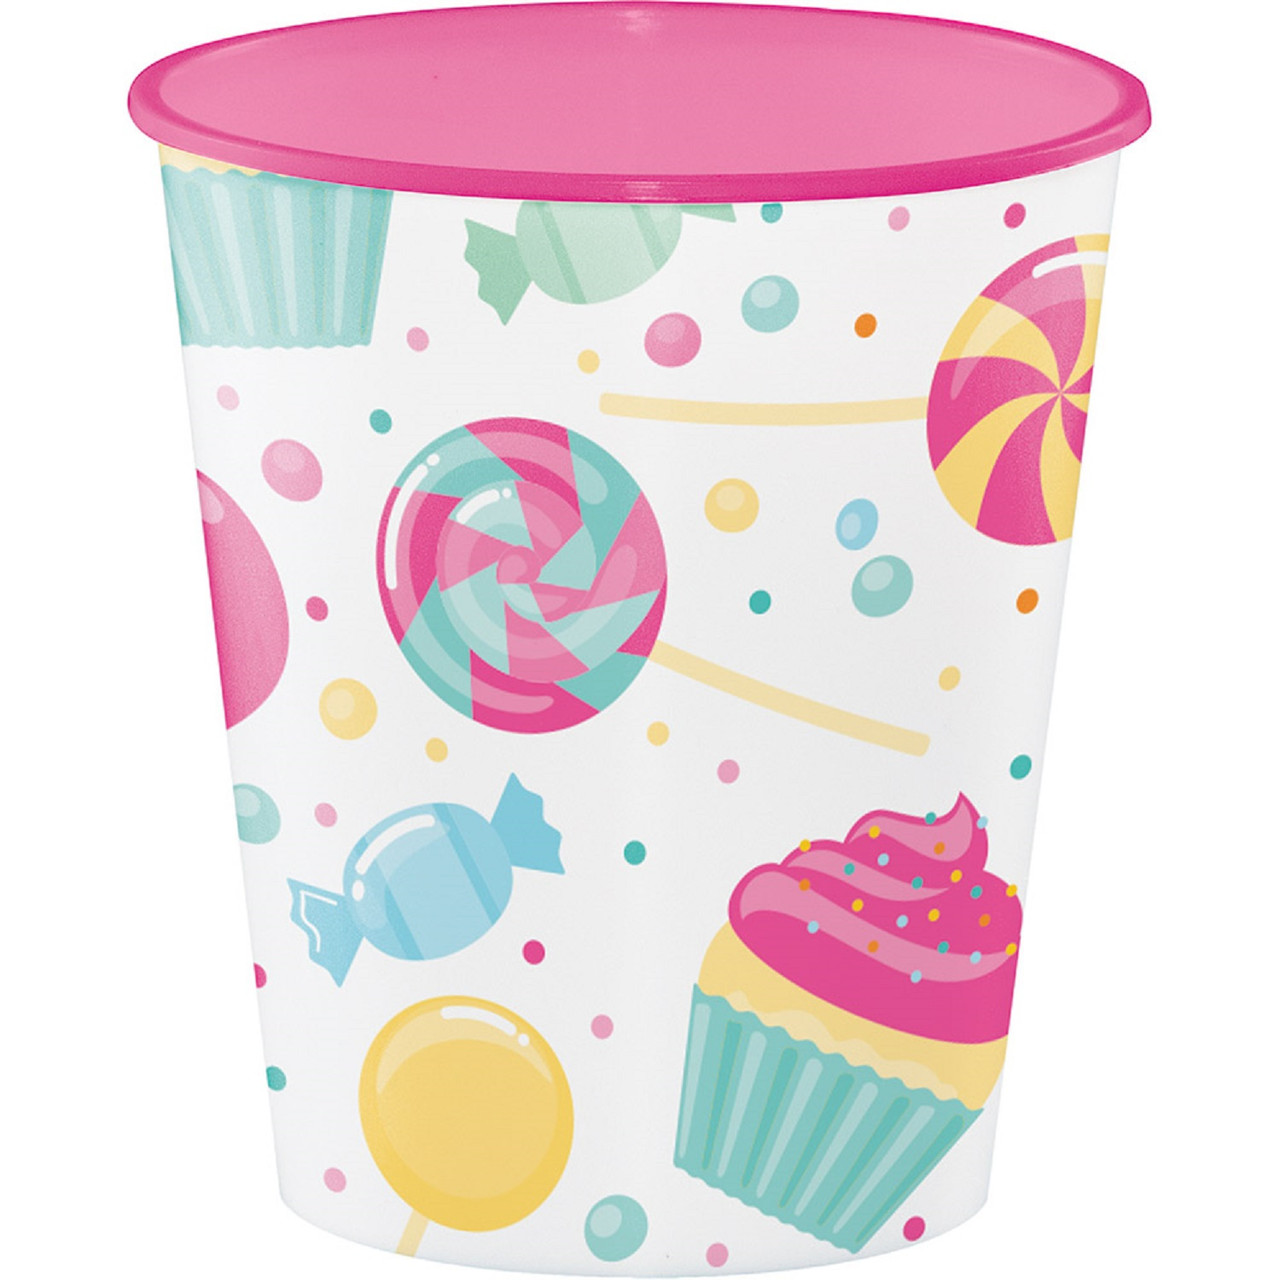 Disposable Plastic Cups With Lids For Drinks, Desserts, Christmas